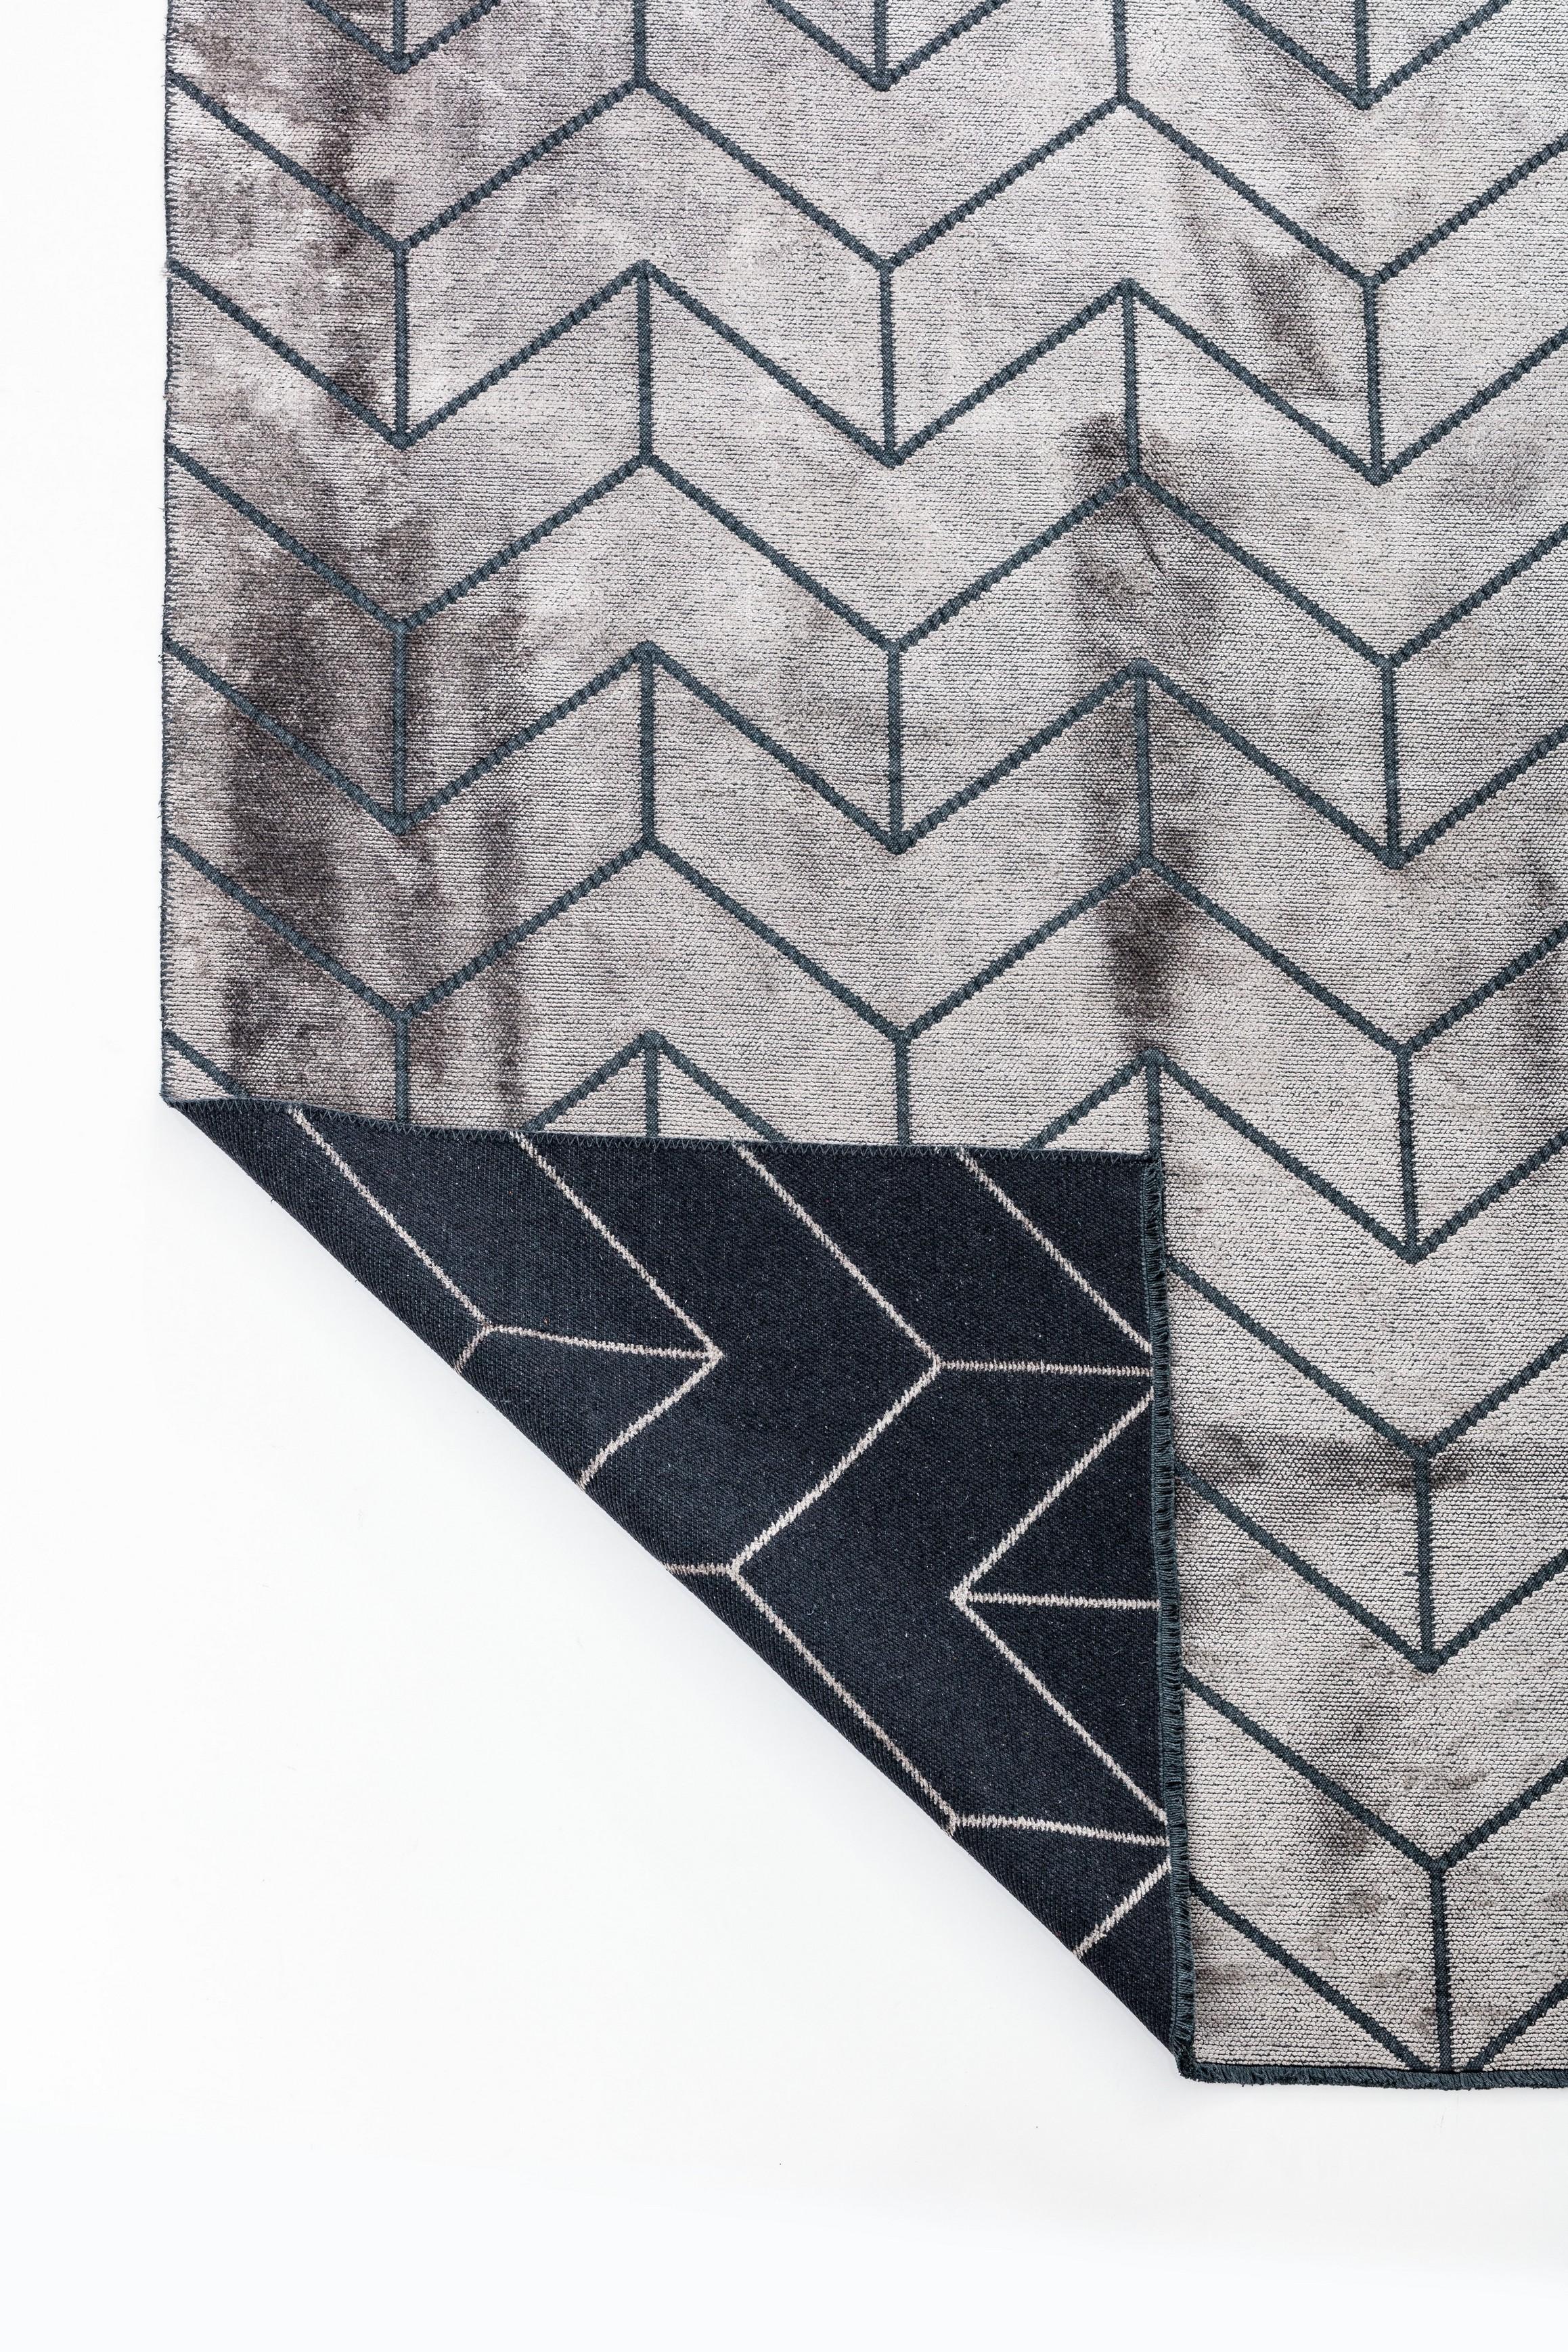 For Sale:  (Gray) Modern Chevron Luxury Hand-Finished Area Rug 3